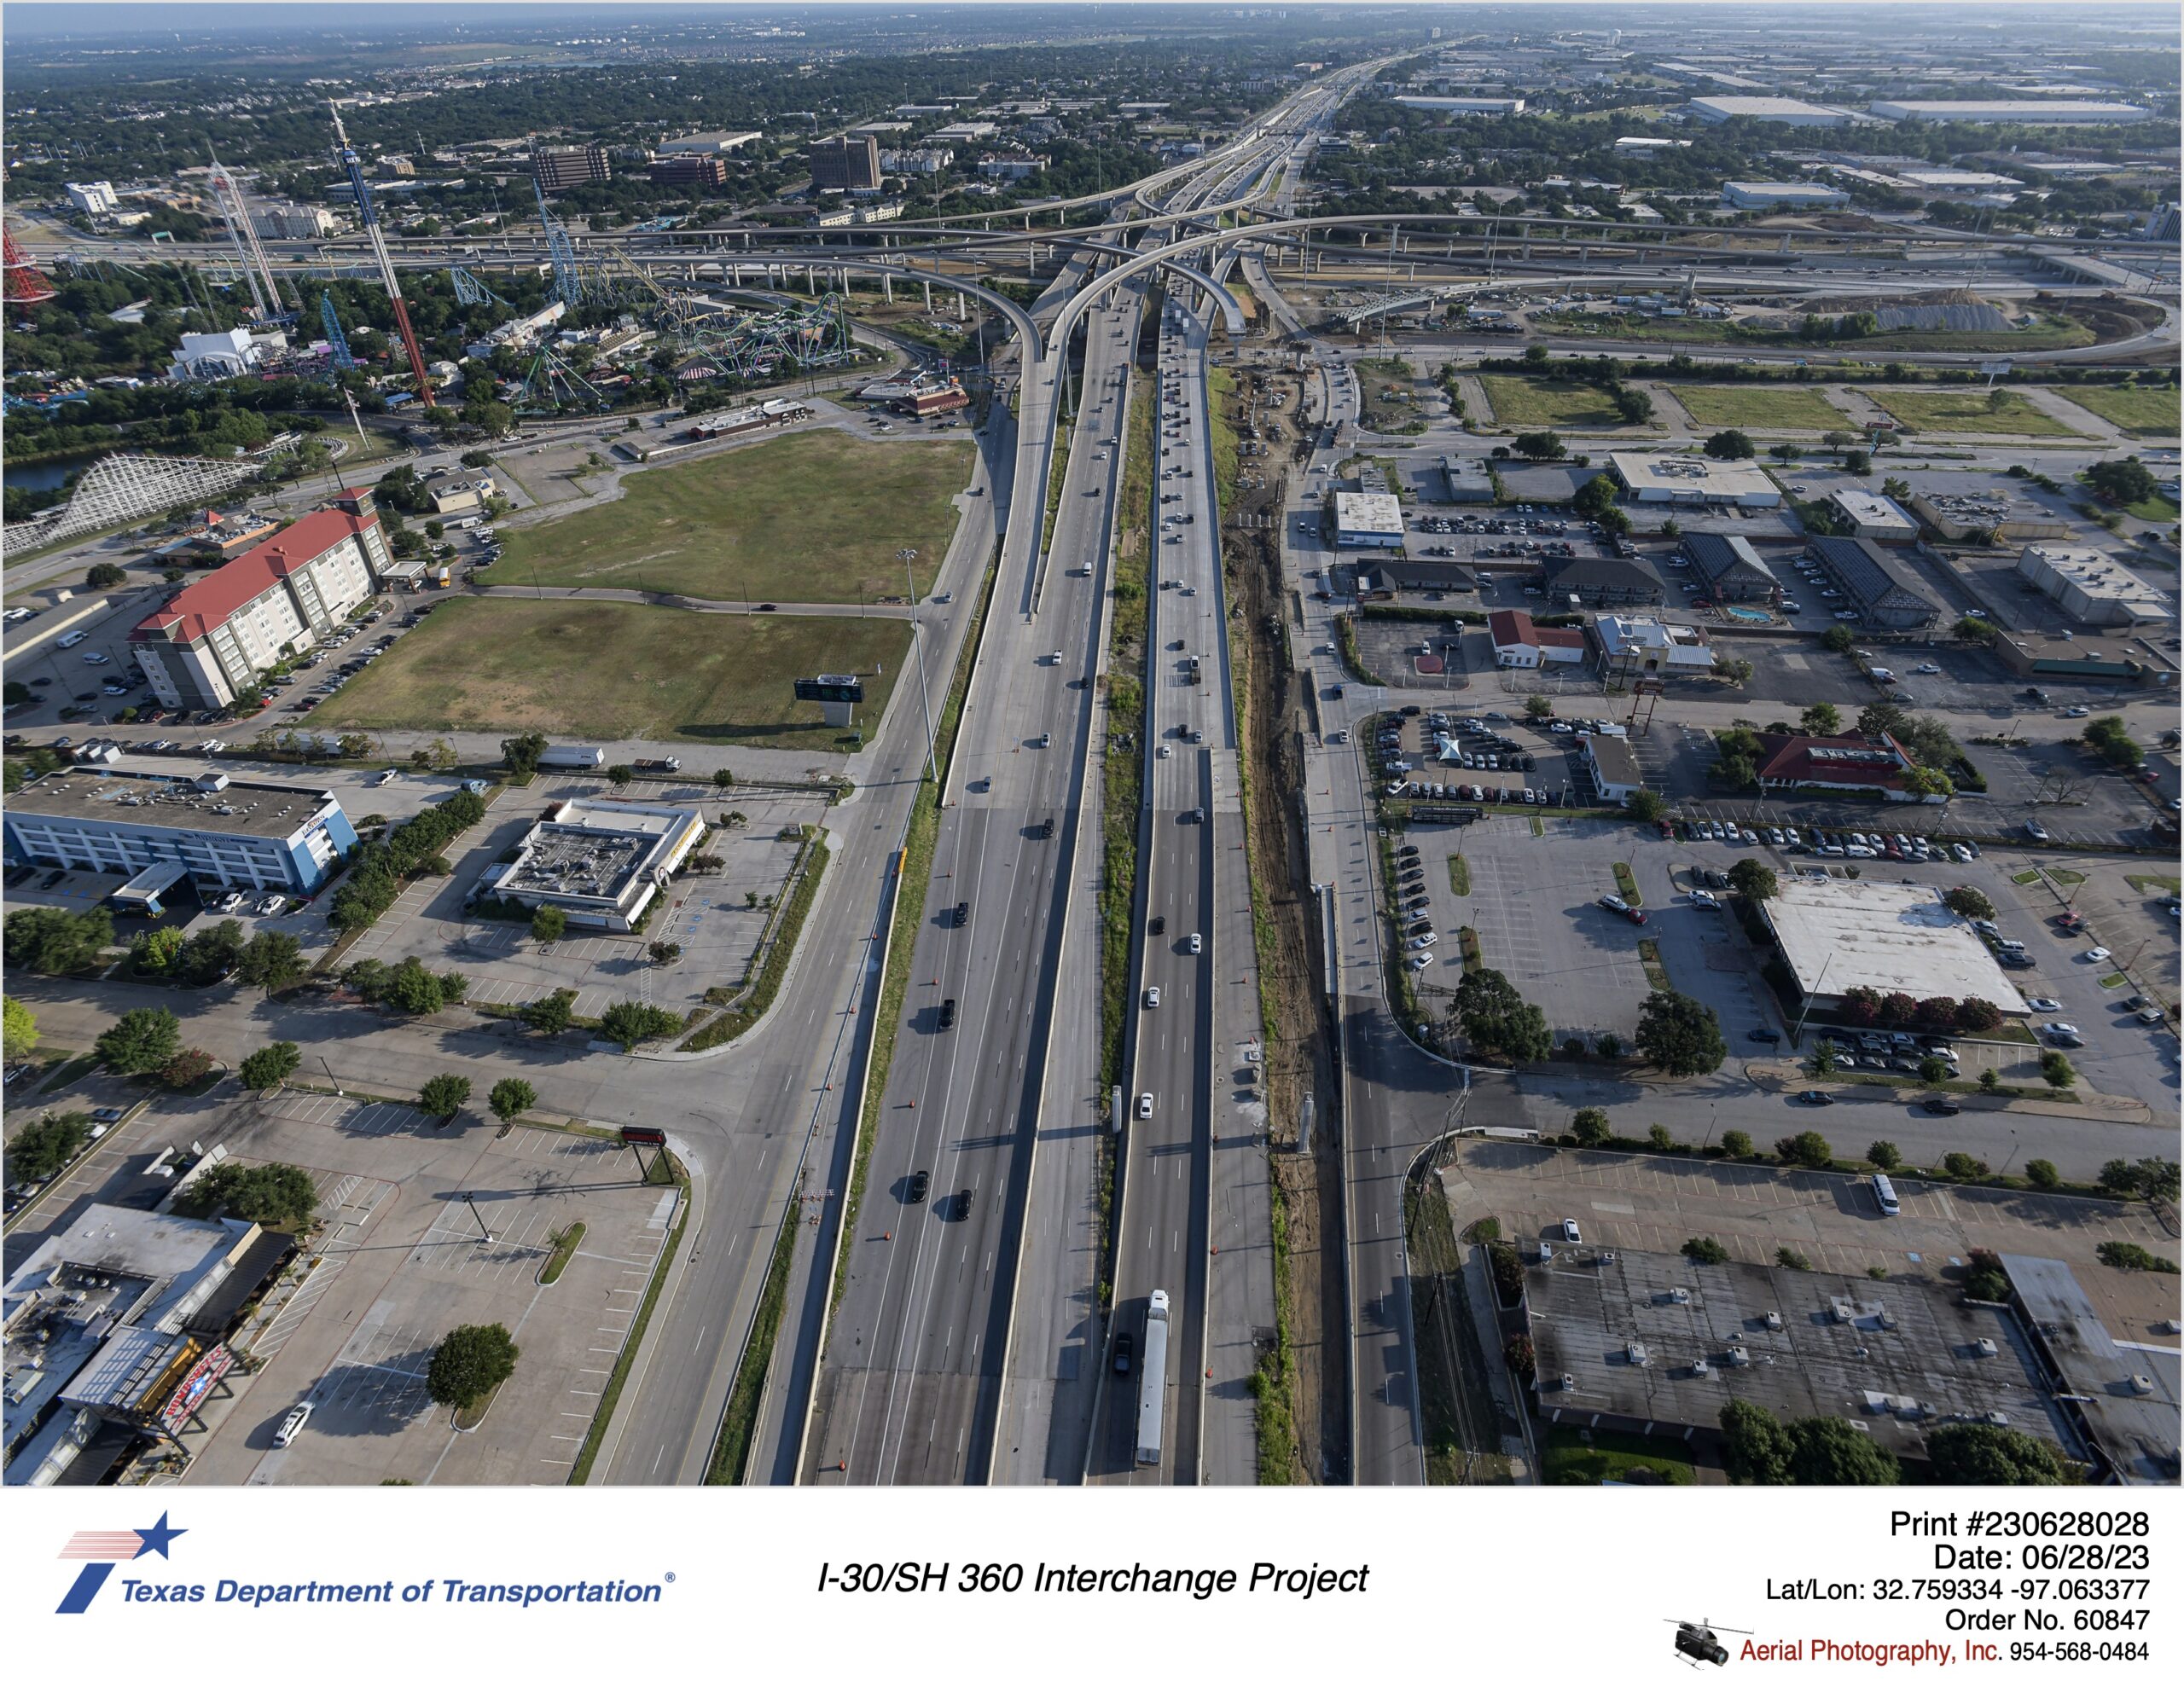 SH 360 looking north over the Randol Mill Rd interchange. Image shows construction of direct connectors between northbound mainlanes and frontage road.